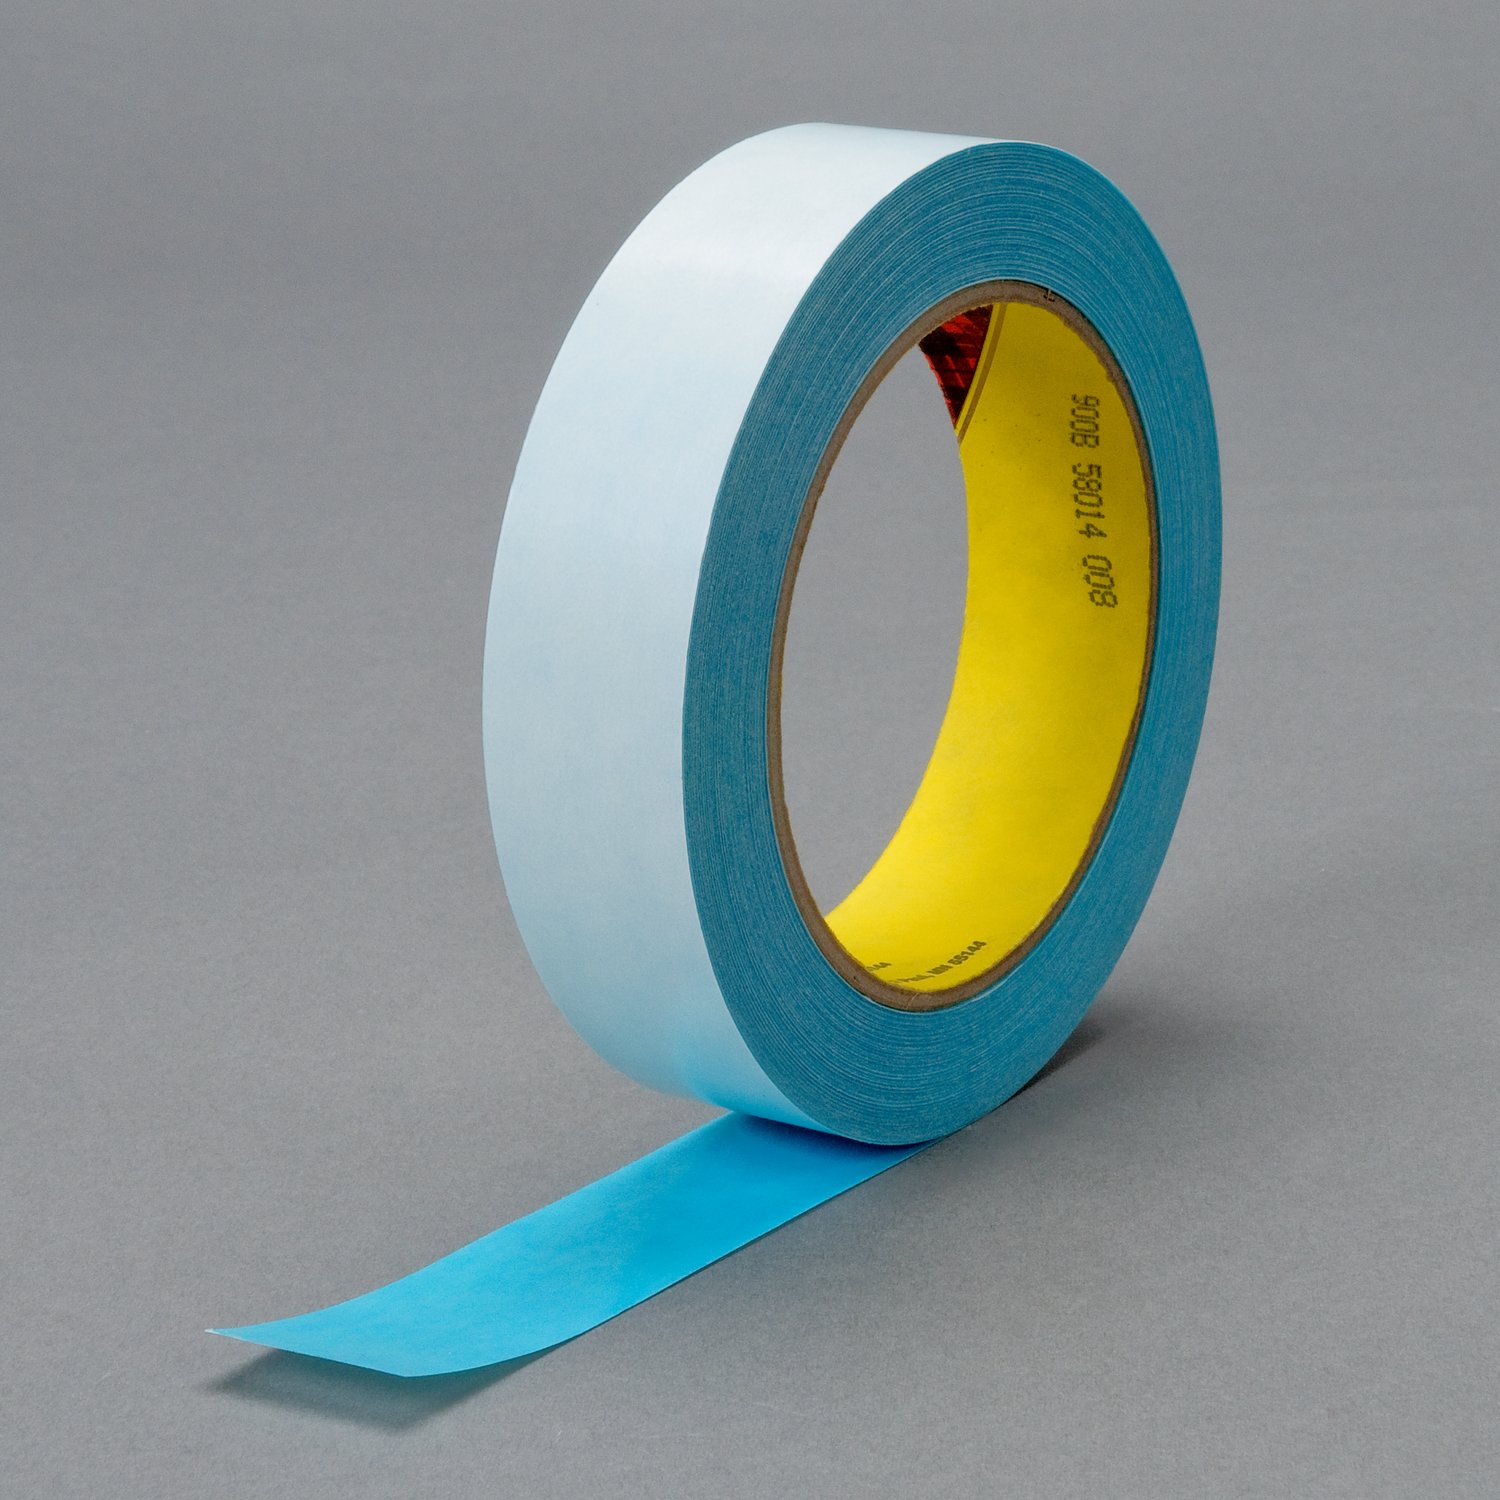 7100012367 - 3M Repulpable Double Coated Splicing Tape 900B, Blue, 2.5 mil, Roll,
Config